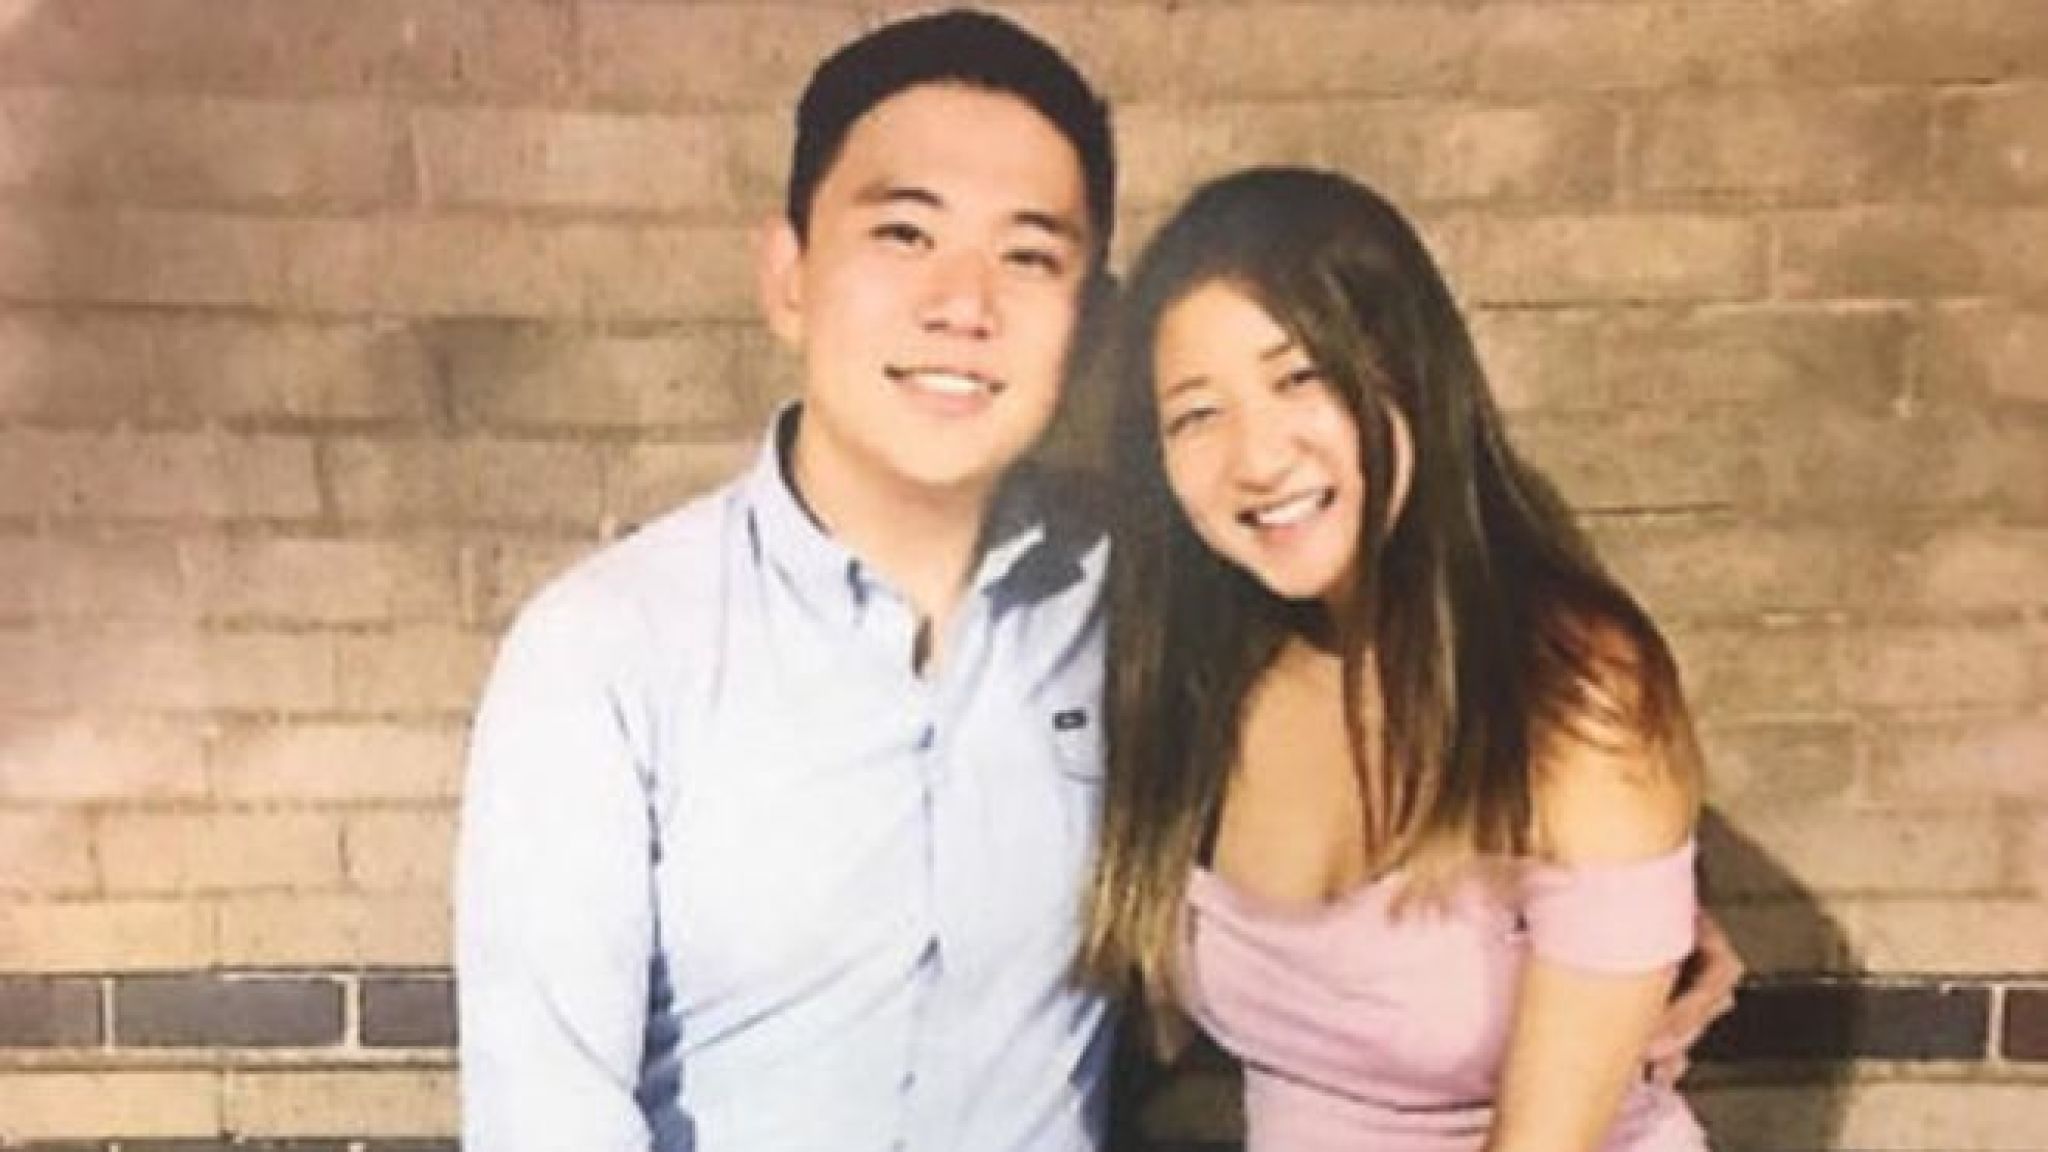 Alexander Urtula , Pictured With Inyoung You, Took - Boston College Student Girlfriend Charged Over His - HD Wallpaper 